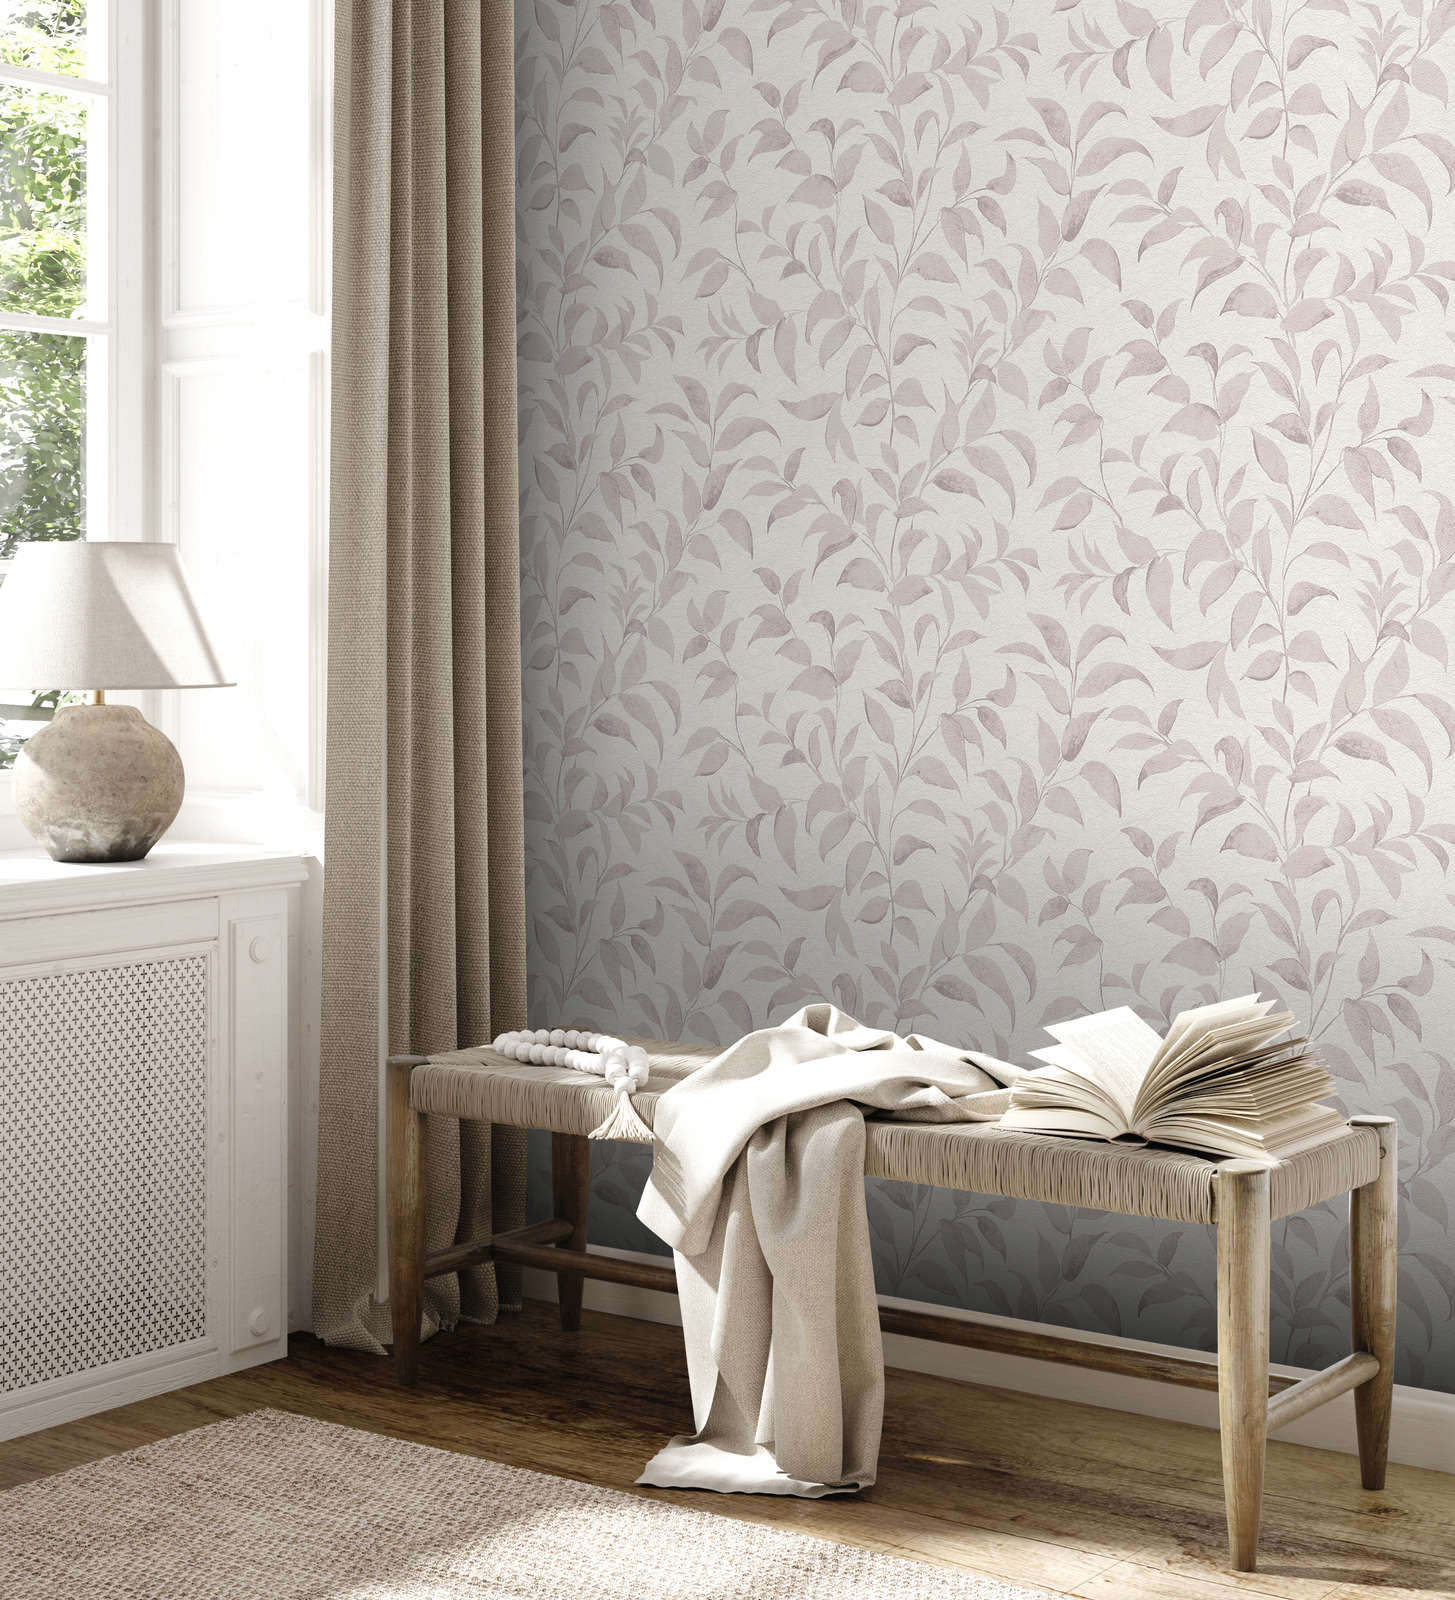             wallpaper floral with leaves shimmer textured - white, beige, grey
        